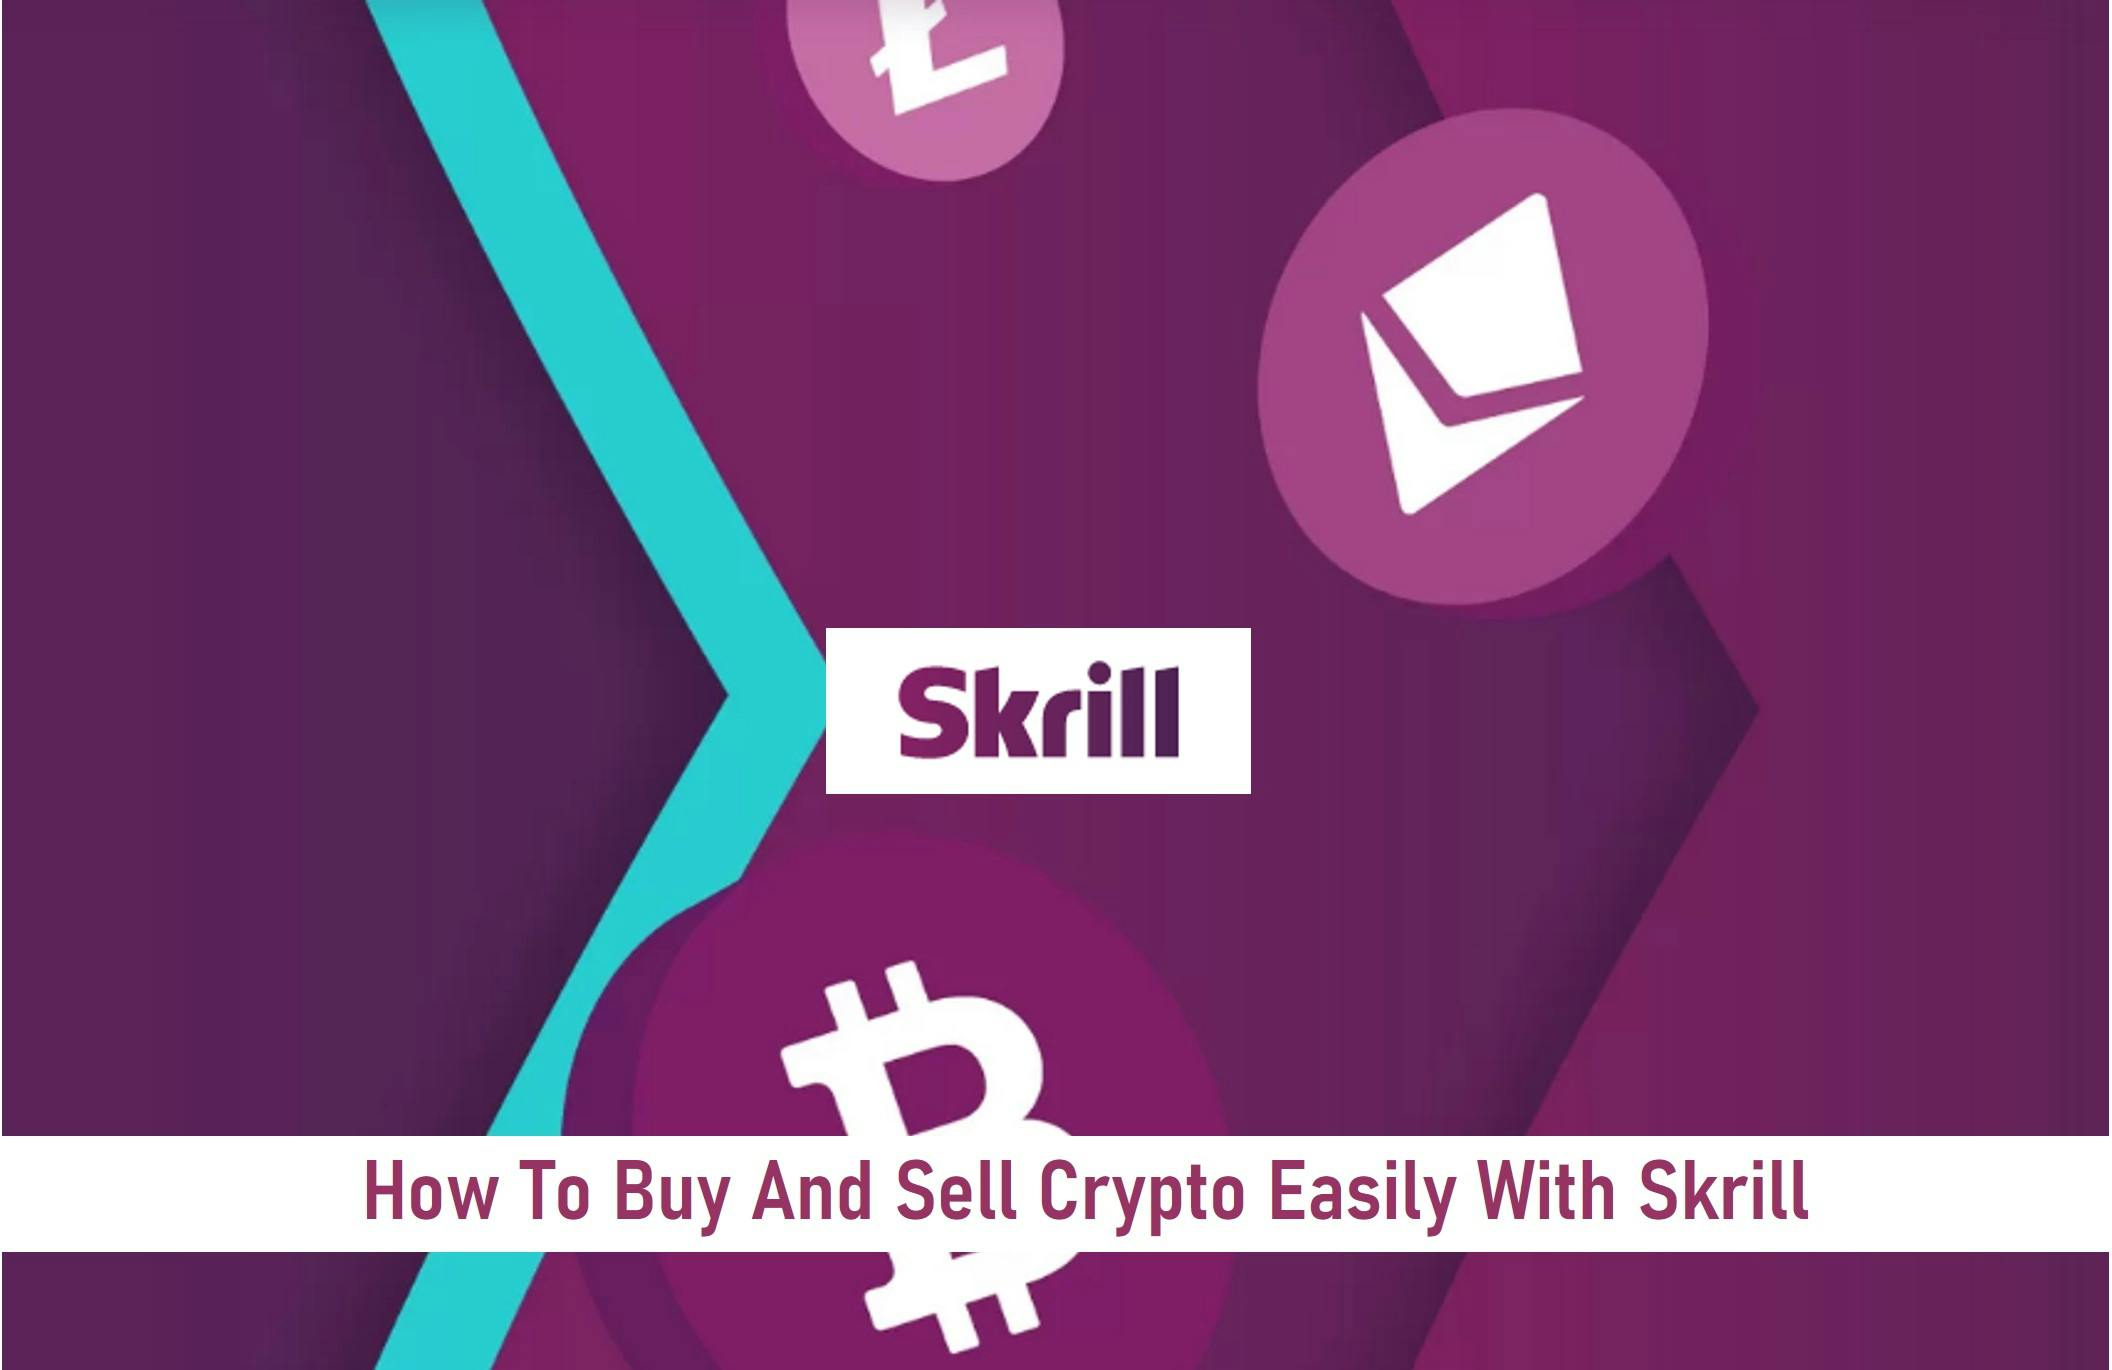 How To Buy And Sell Crypto Easily With Skrill